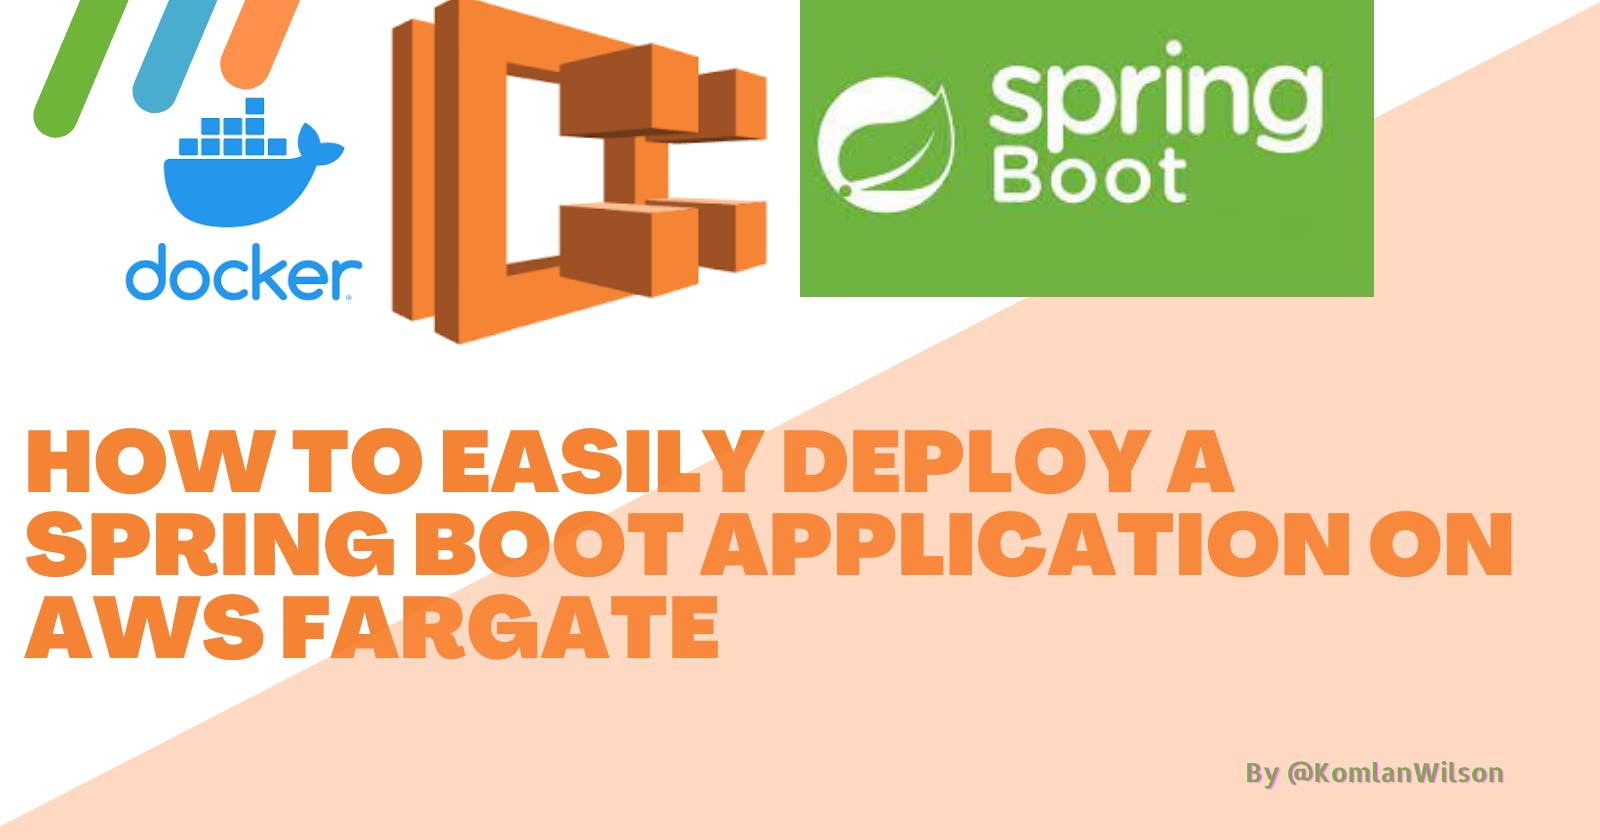 How to Easily Deploy a Spring Boot Application on AWS Fargate